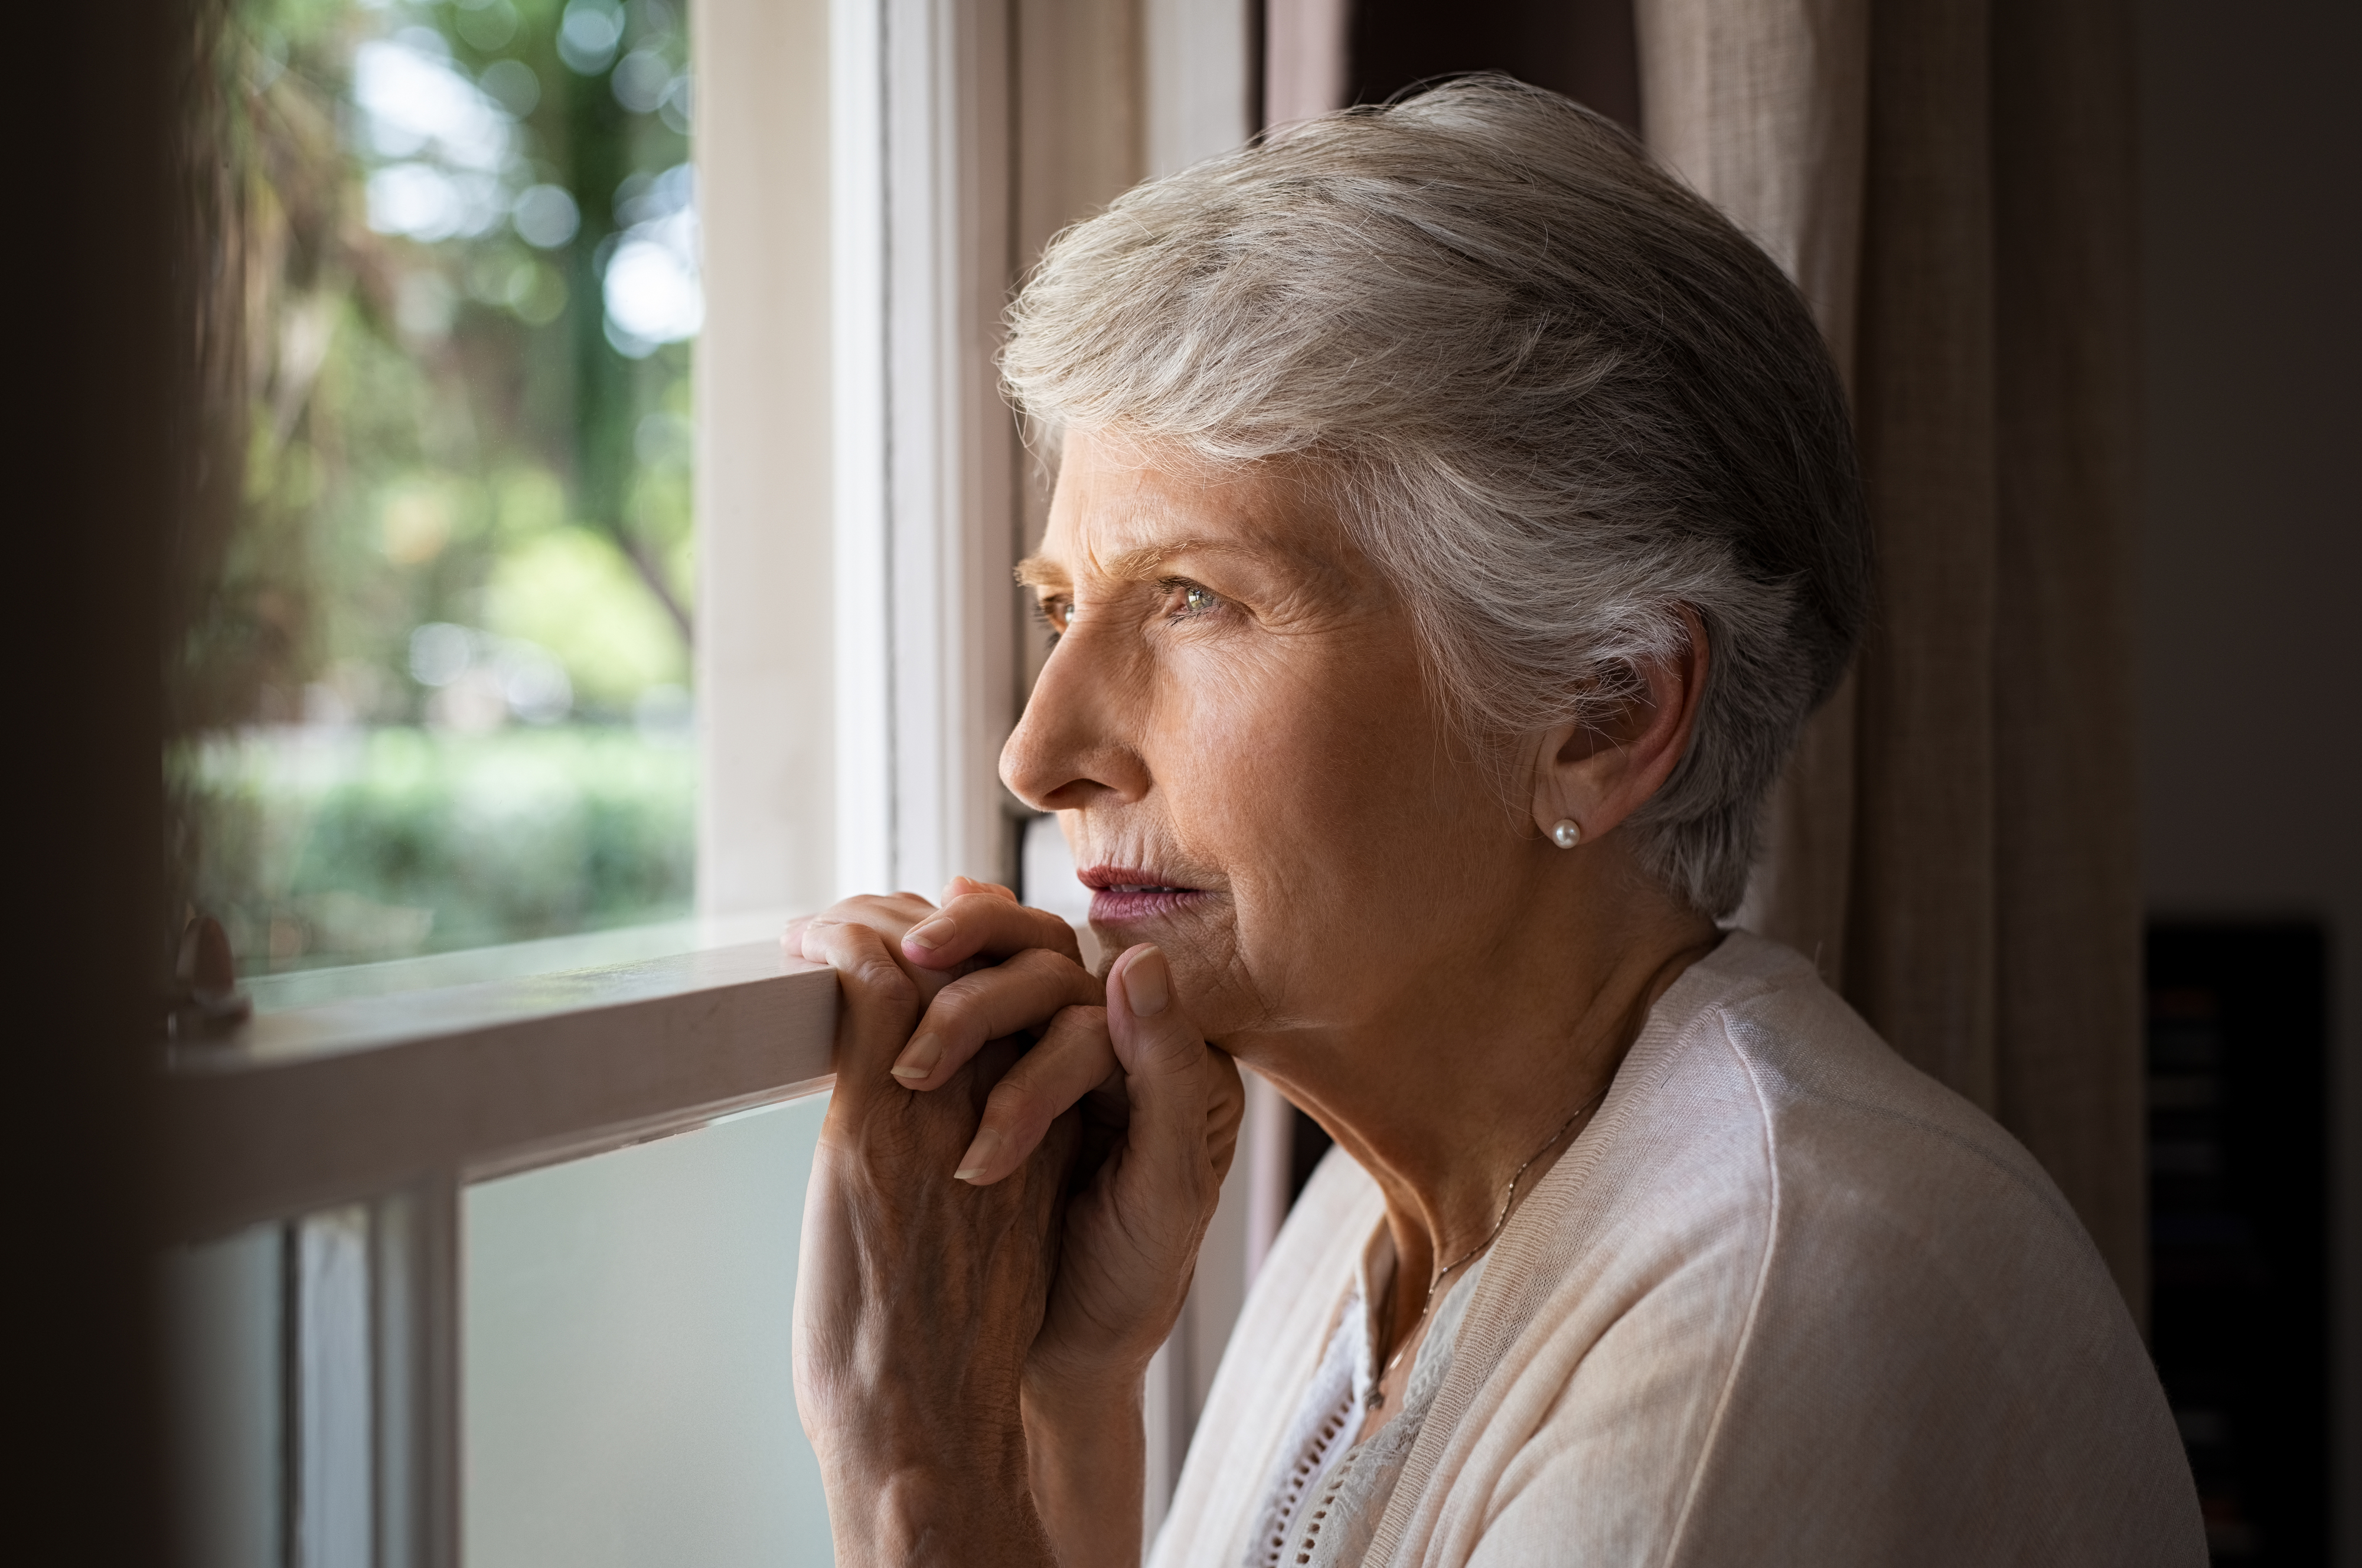 An older woman looking contemplatively out a window